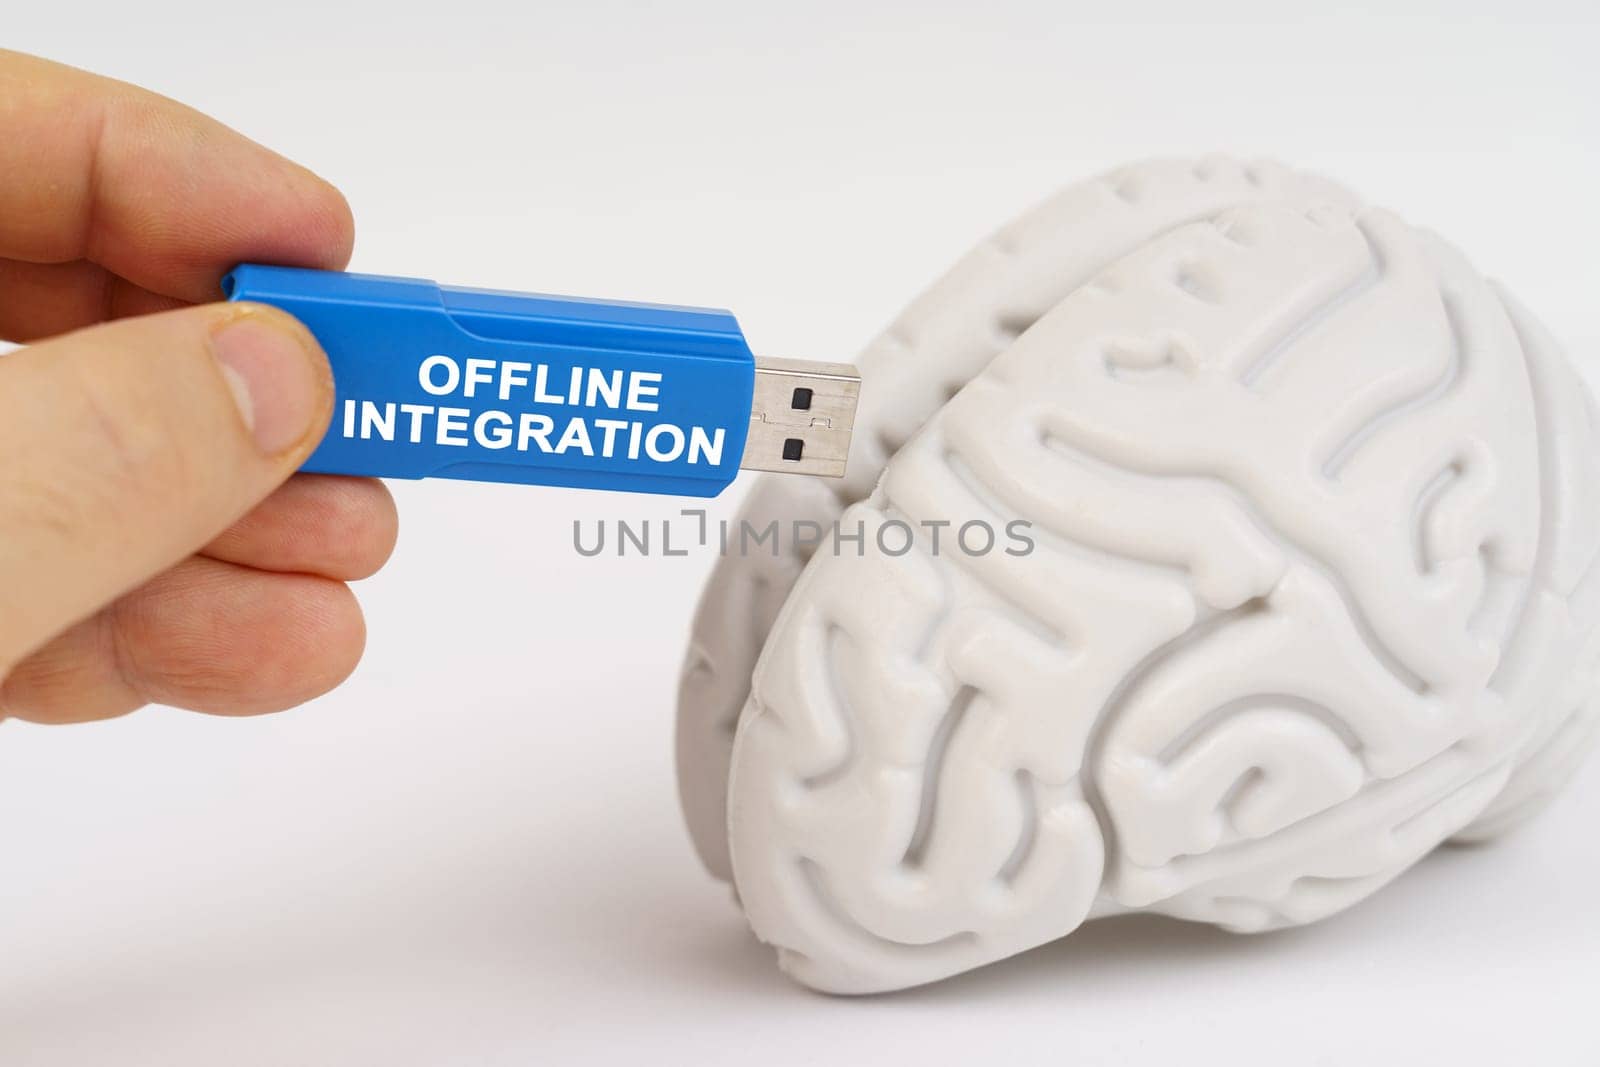 A man inserts a flash drive into his brain with the inscription - Offline Integration by Sd28DimoN_1976